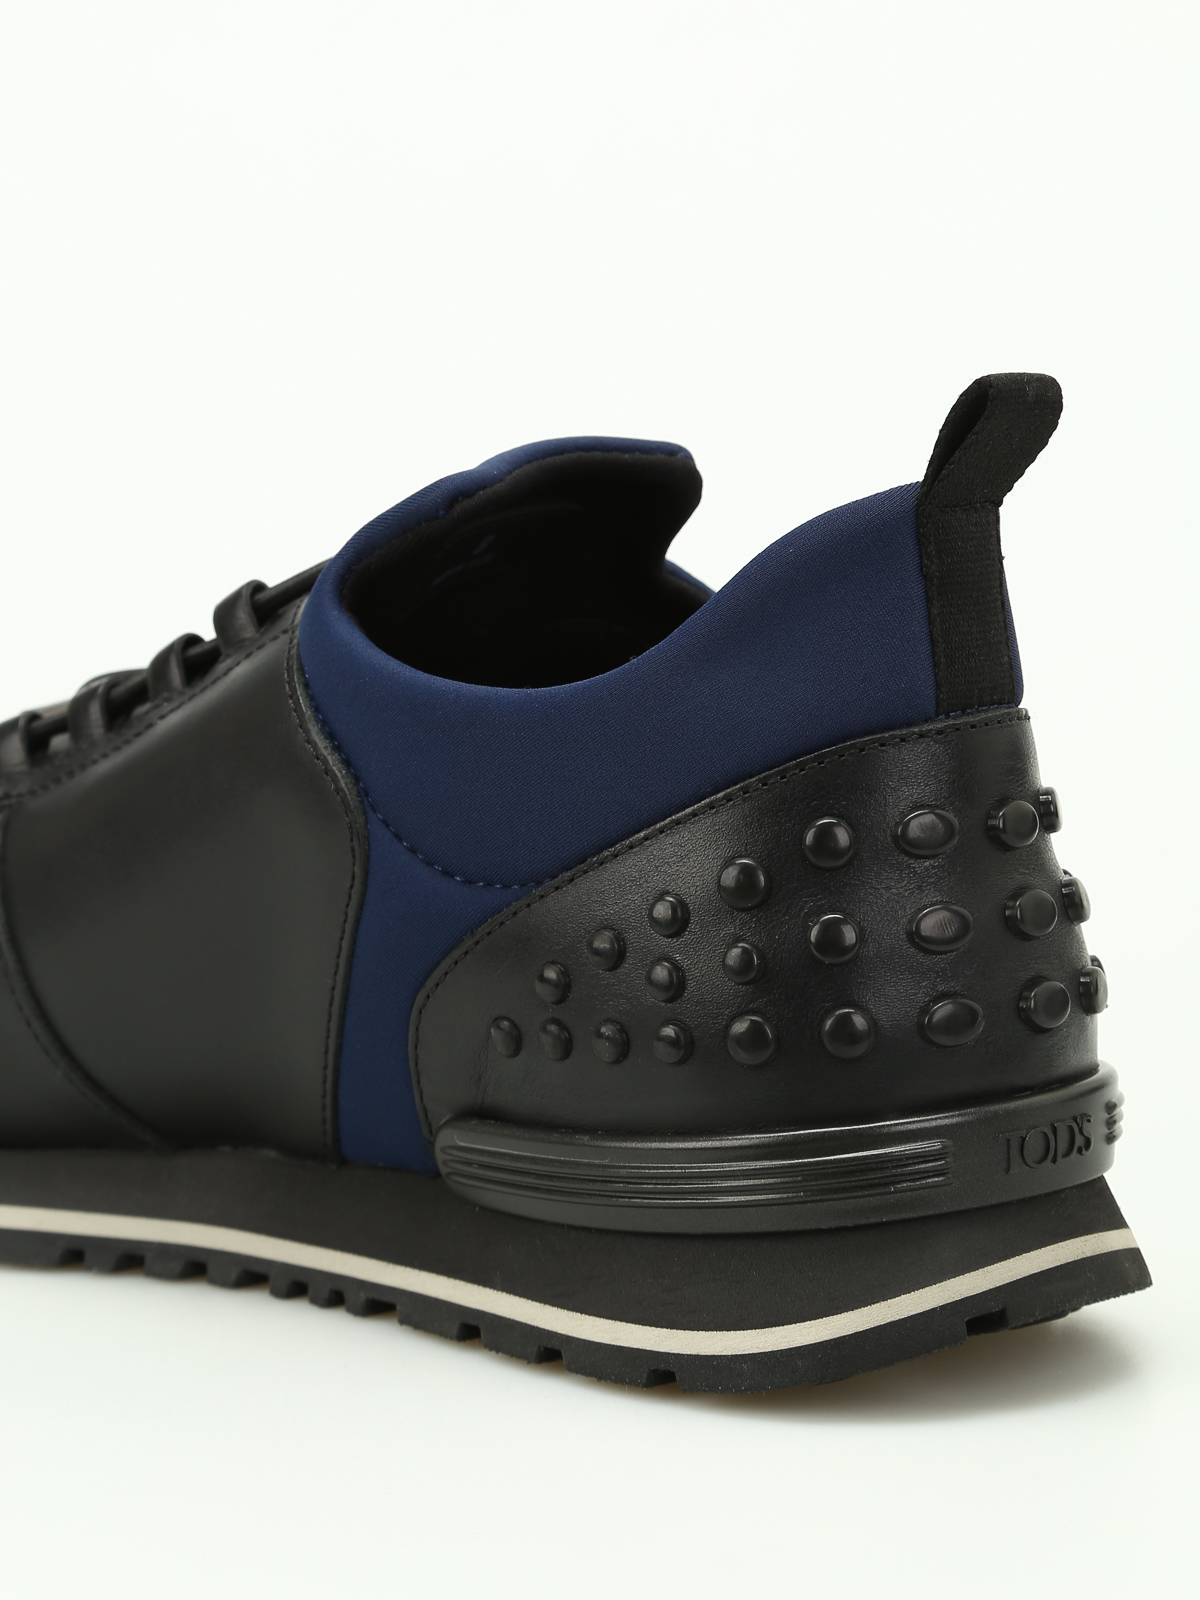 tods running shoes